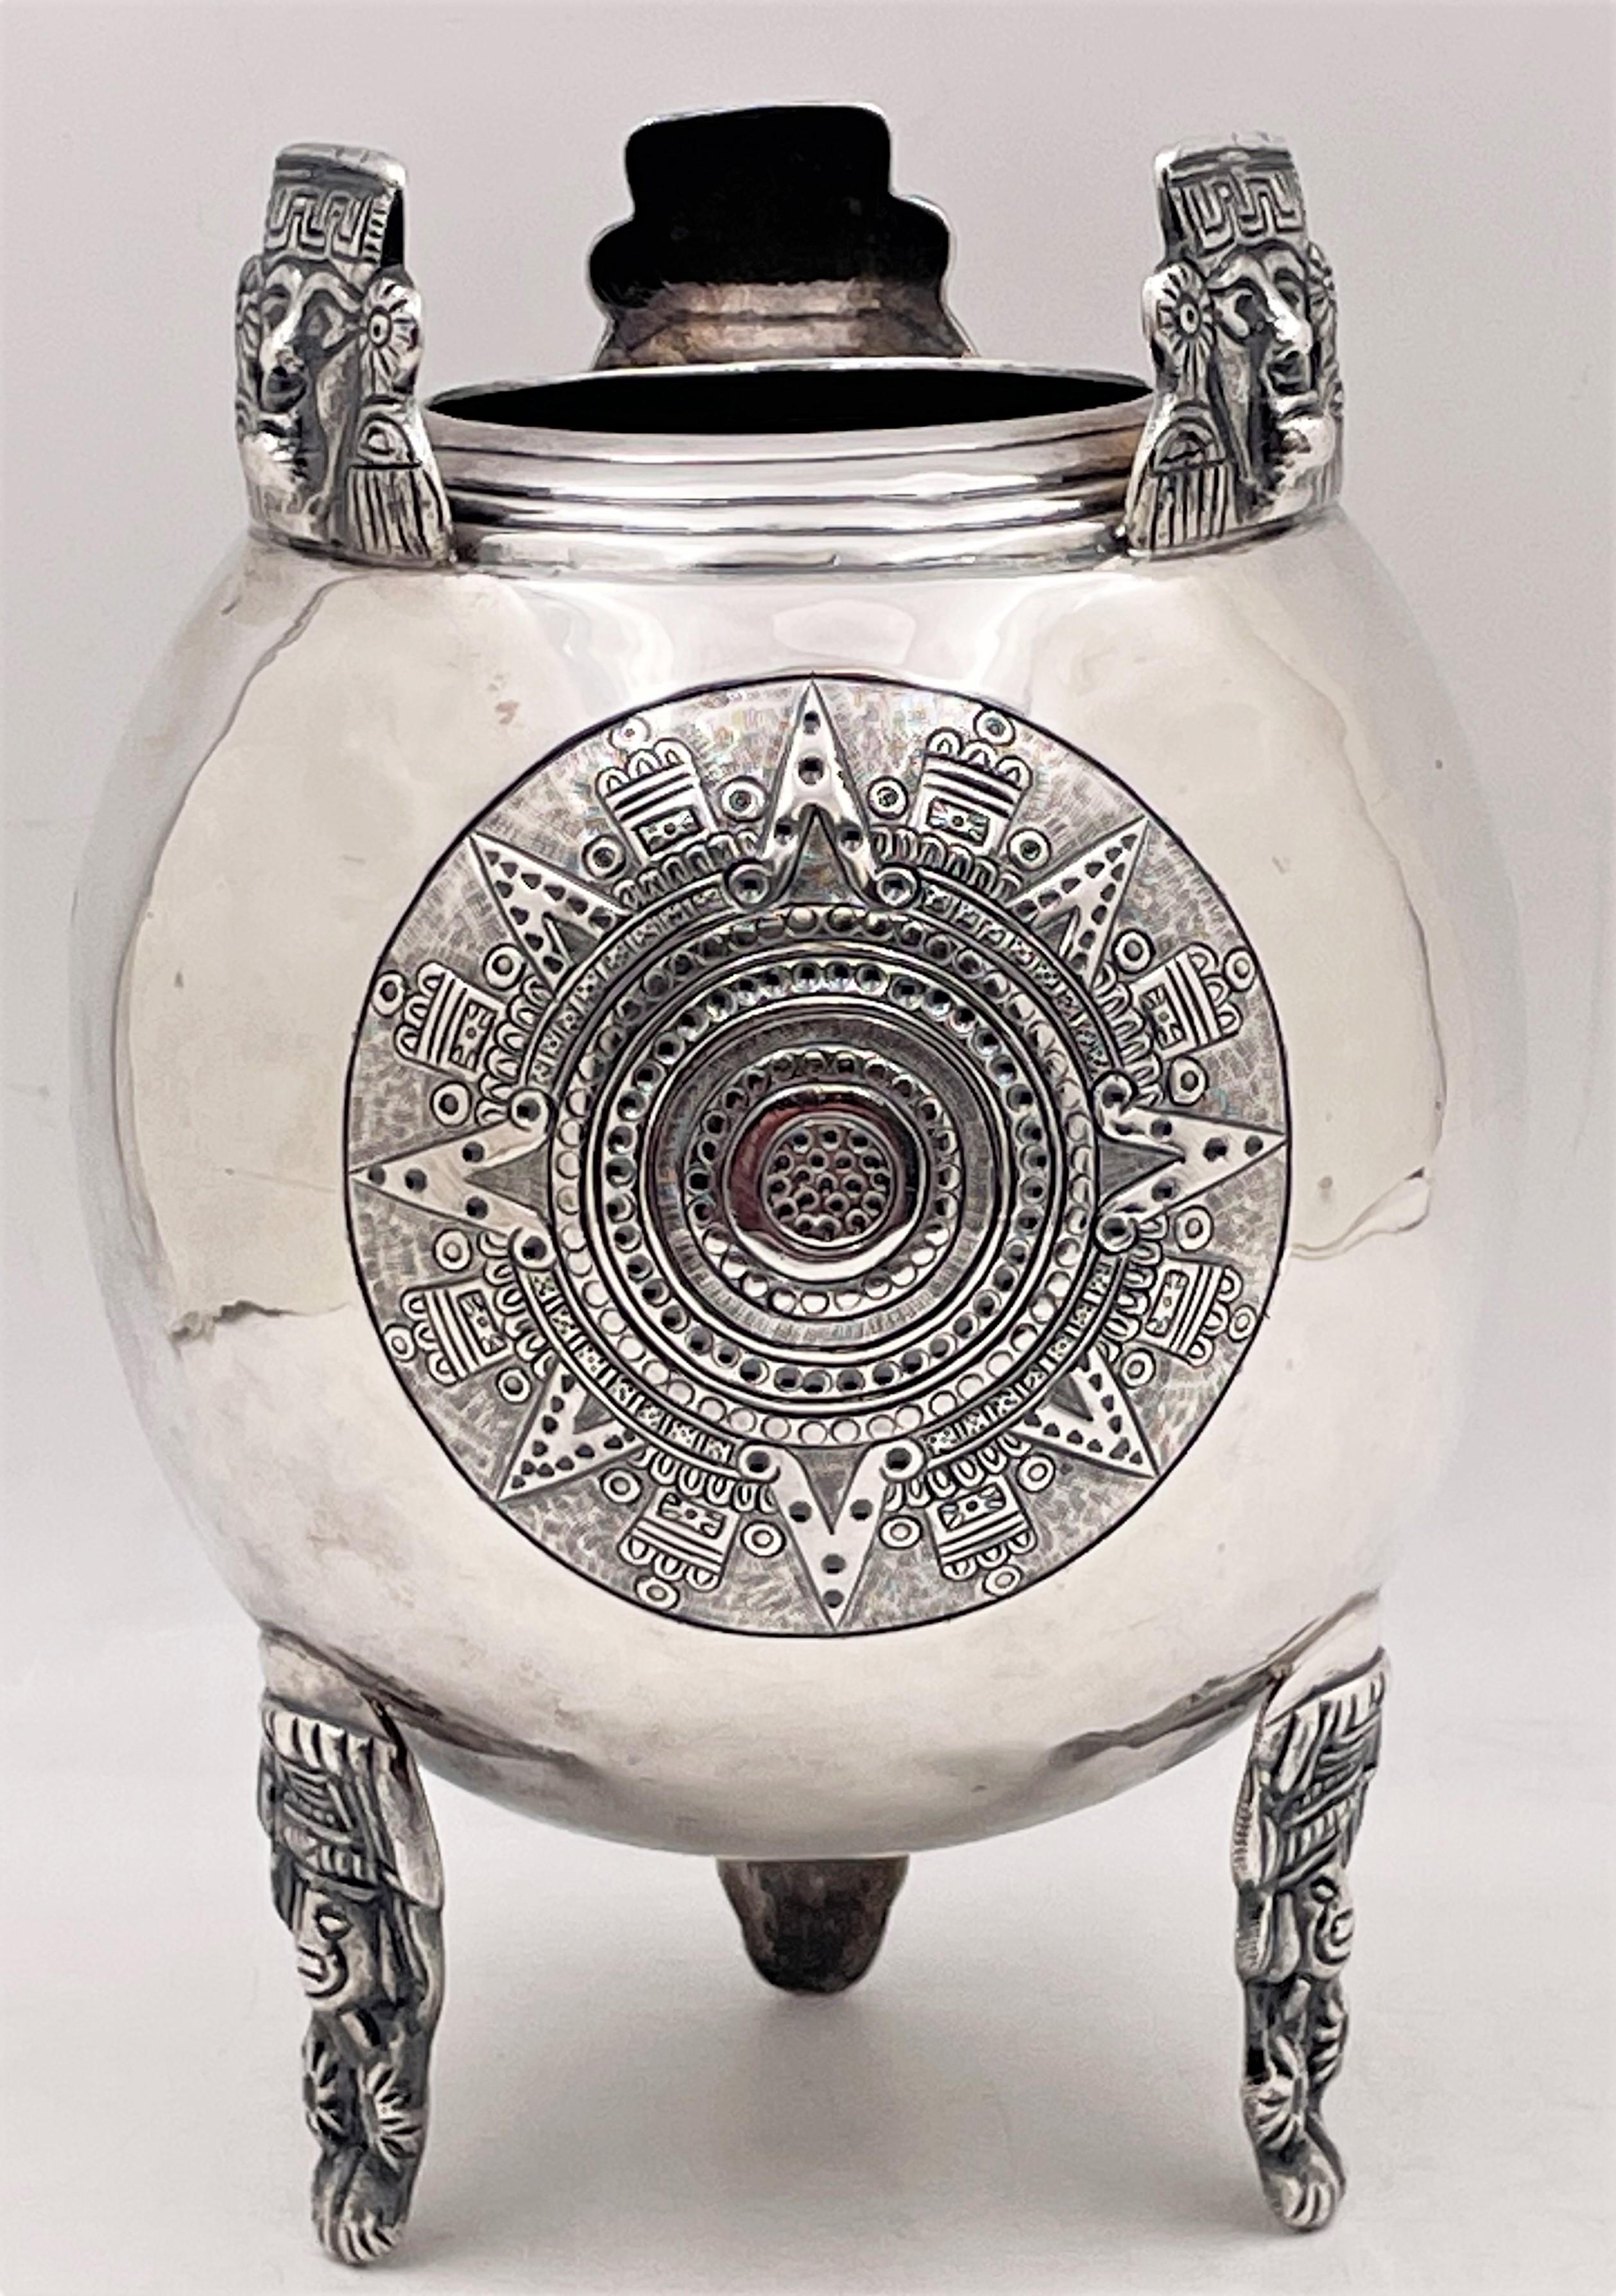 Mexican, sterling silver vase, showcasing elaborate Aztec motifs, including 3 different ones on the body, standing on 3 feet with figural heads, as well as Aztec-style masks emerging from the top of the vase. The hallmark is slightly illegible, but